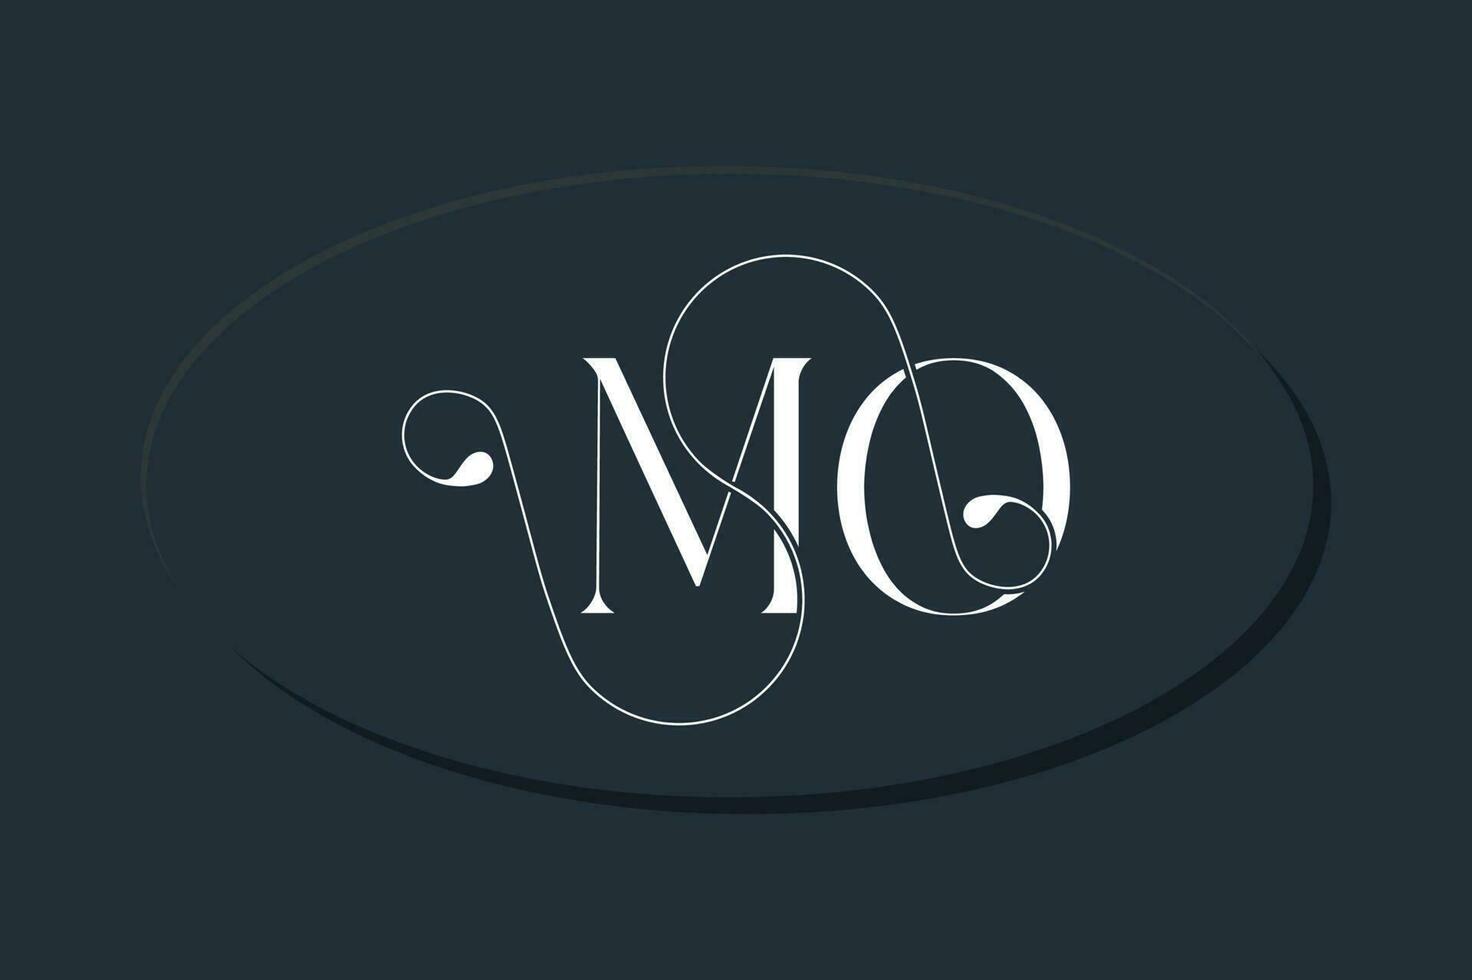 MO ligature style typography letter mark logo design template vector